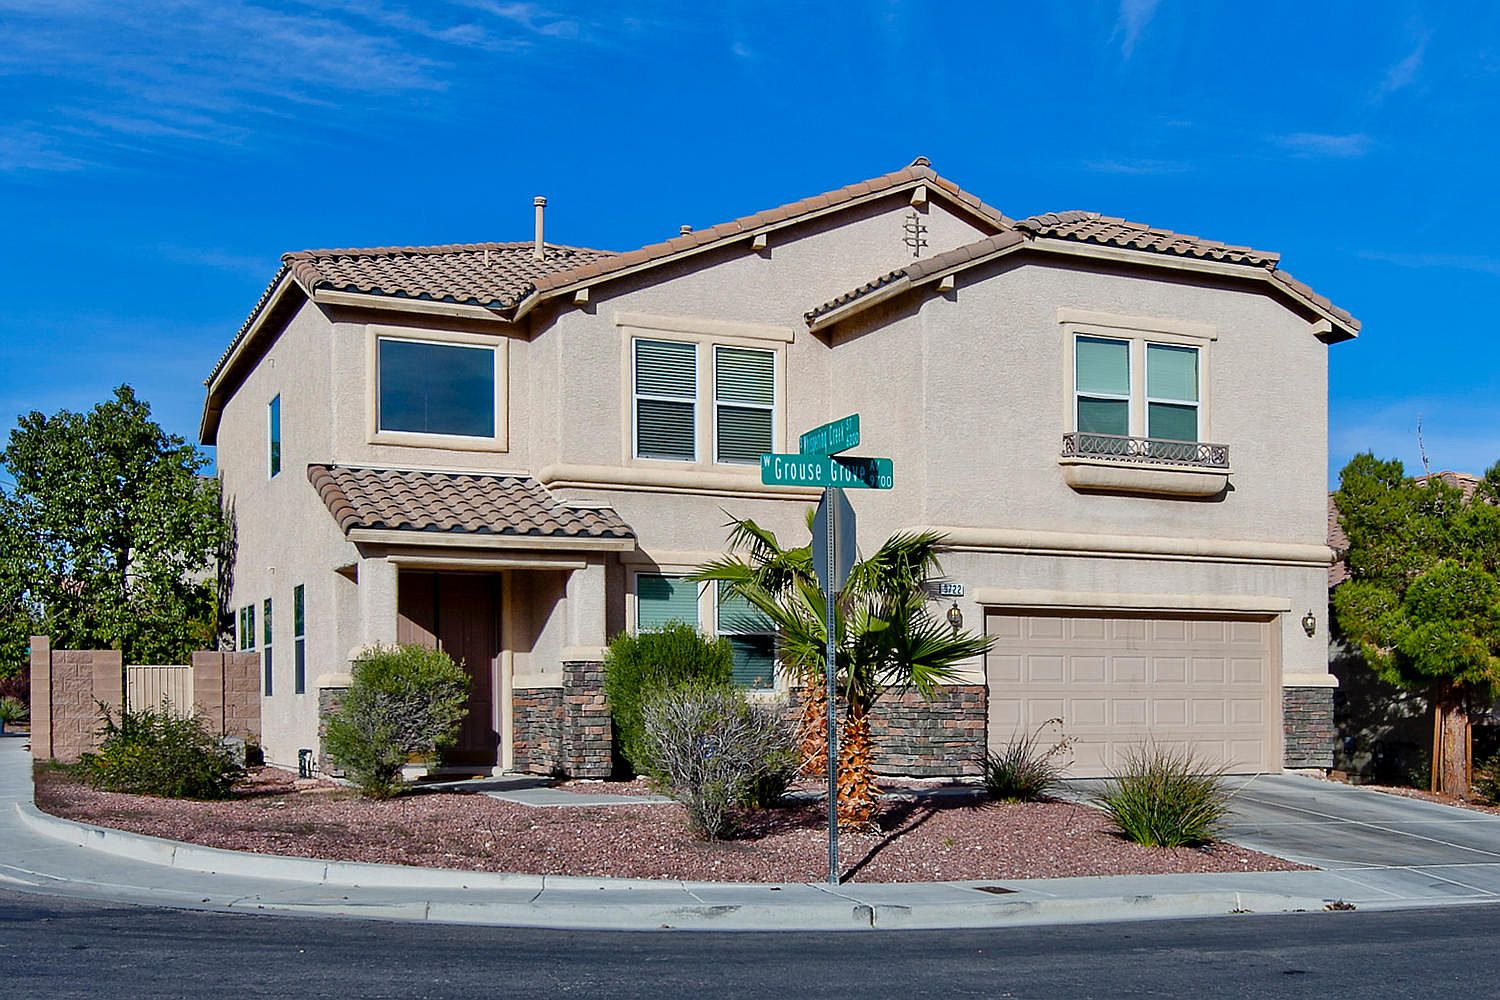 9722 Grouse Grove Ave, Las Vegas, NV 89148 | Zillow